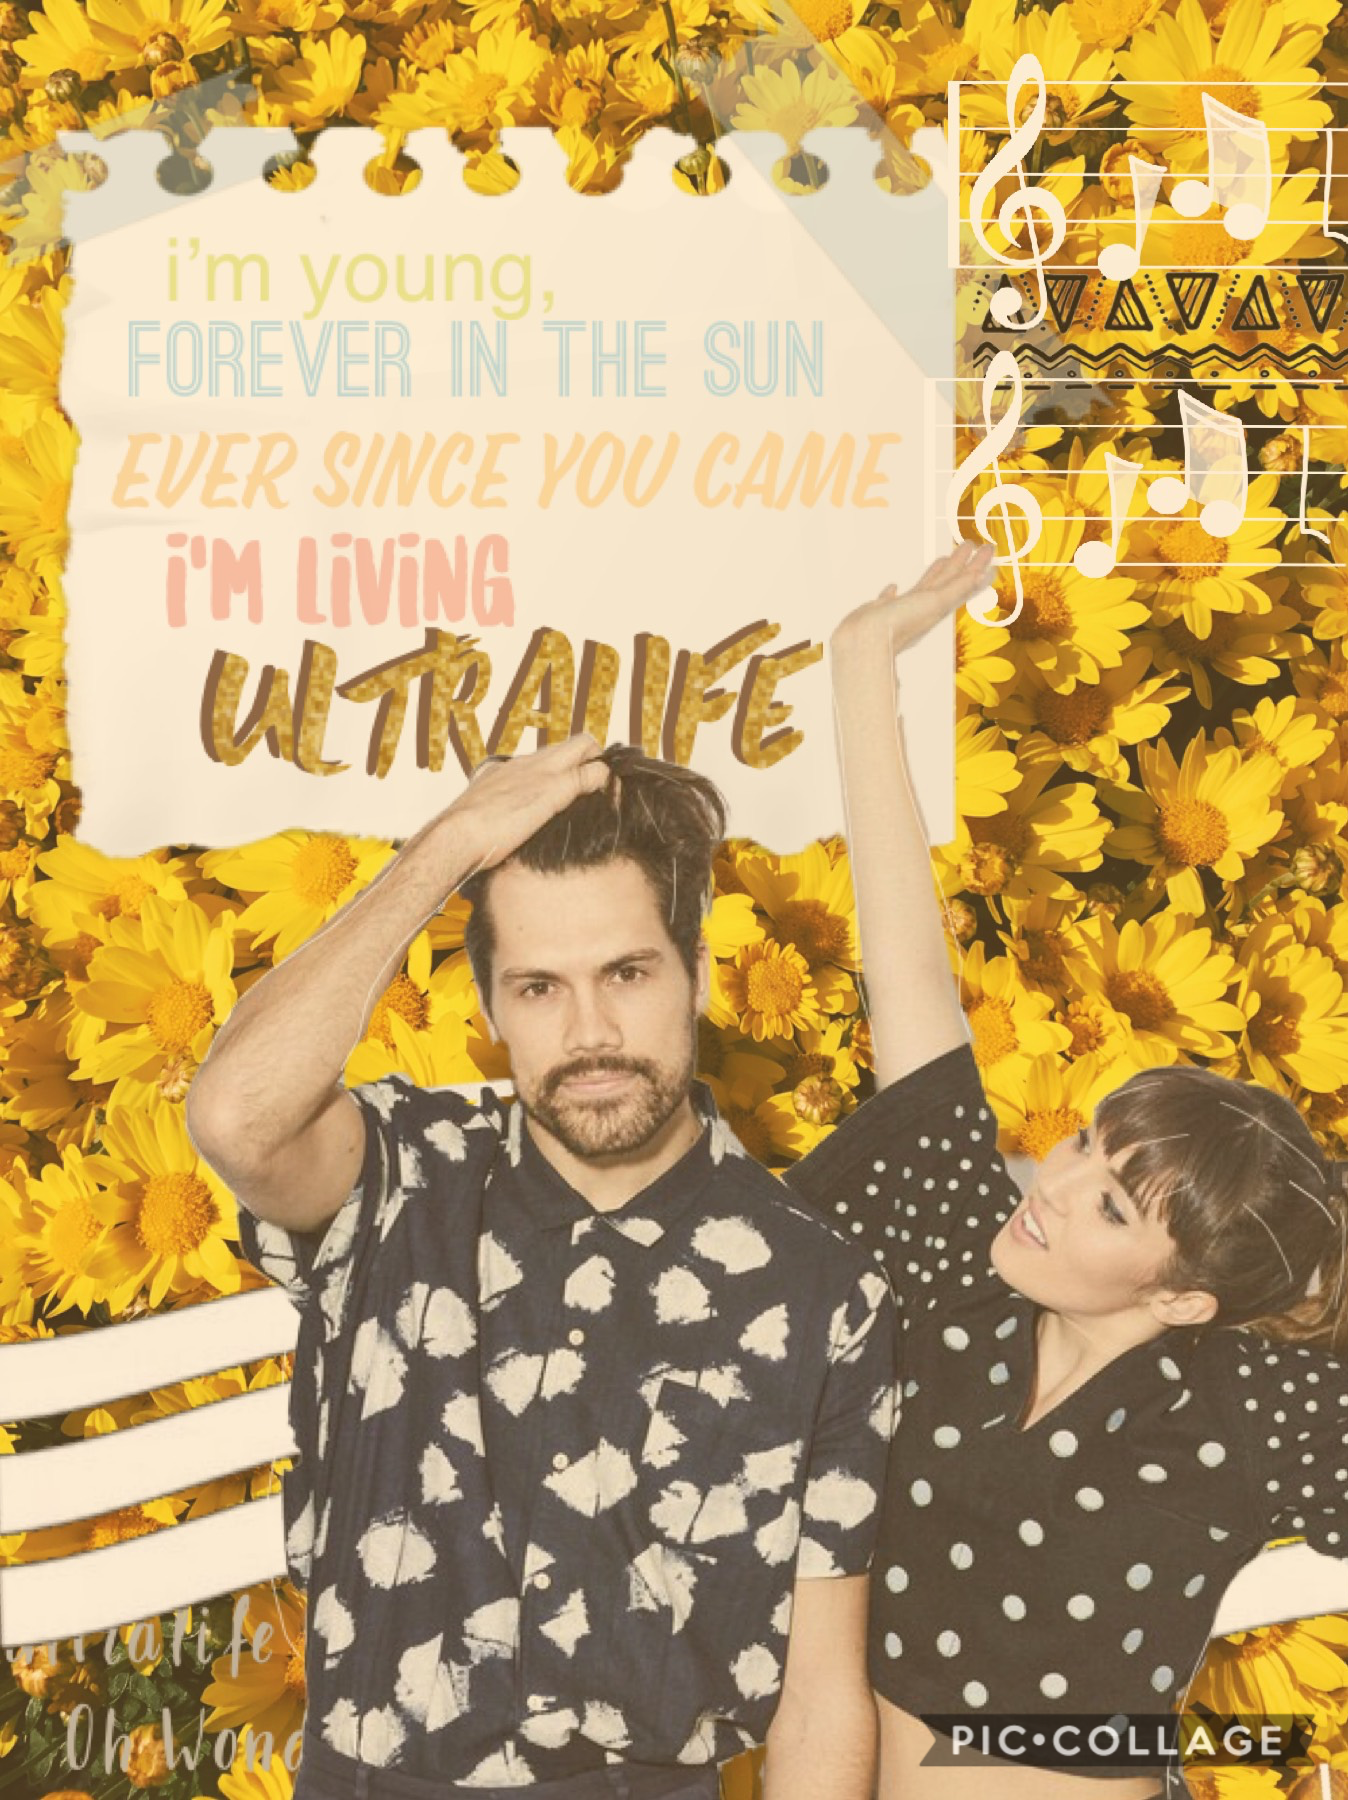 I love this song so much! Ultralife by Oh Wonder!! you should go listen to it if u haven’t already! what’s your favorite song? 💛